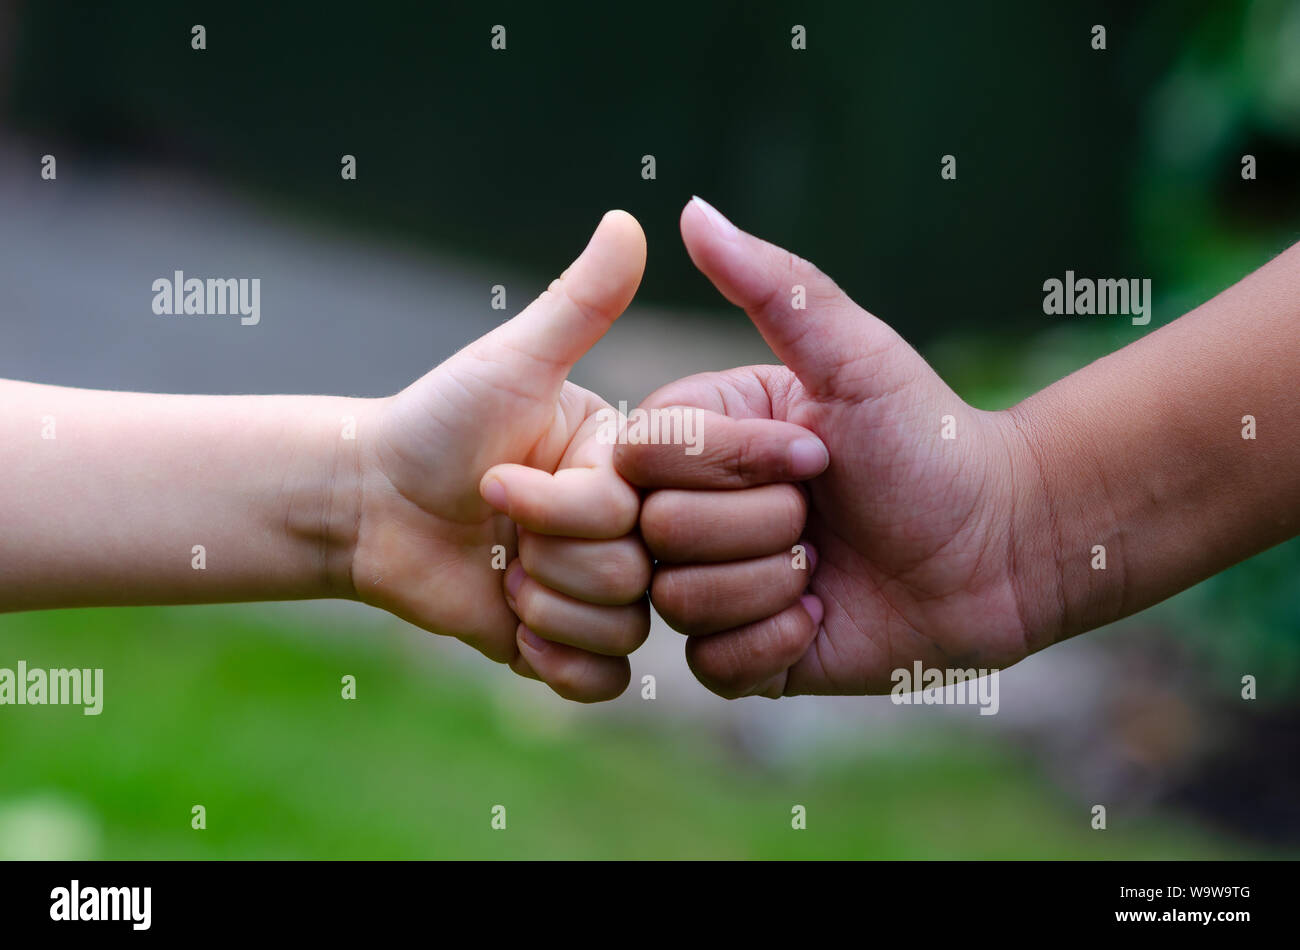 White Boy and black girl show thumbs up or 'like' gesture. Conceptual photo expresses friendship, peace, support, equality and diversity. Stock Photo